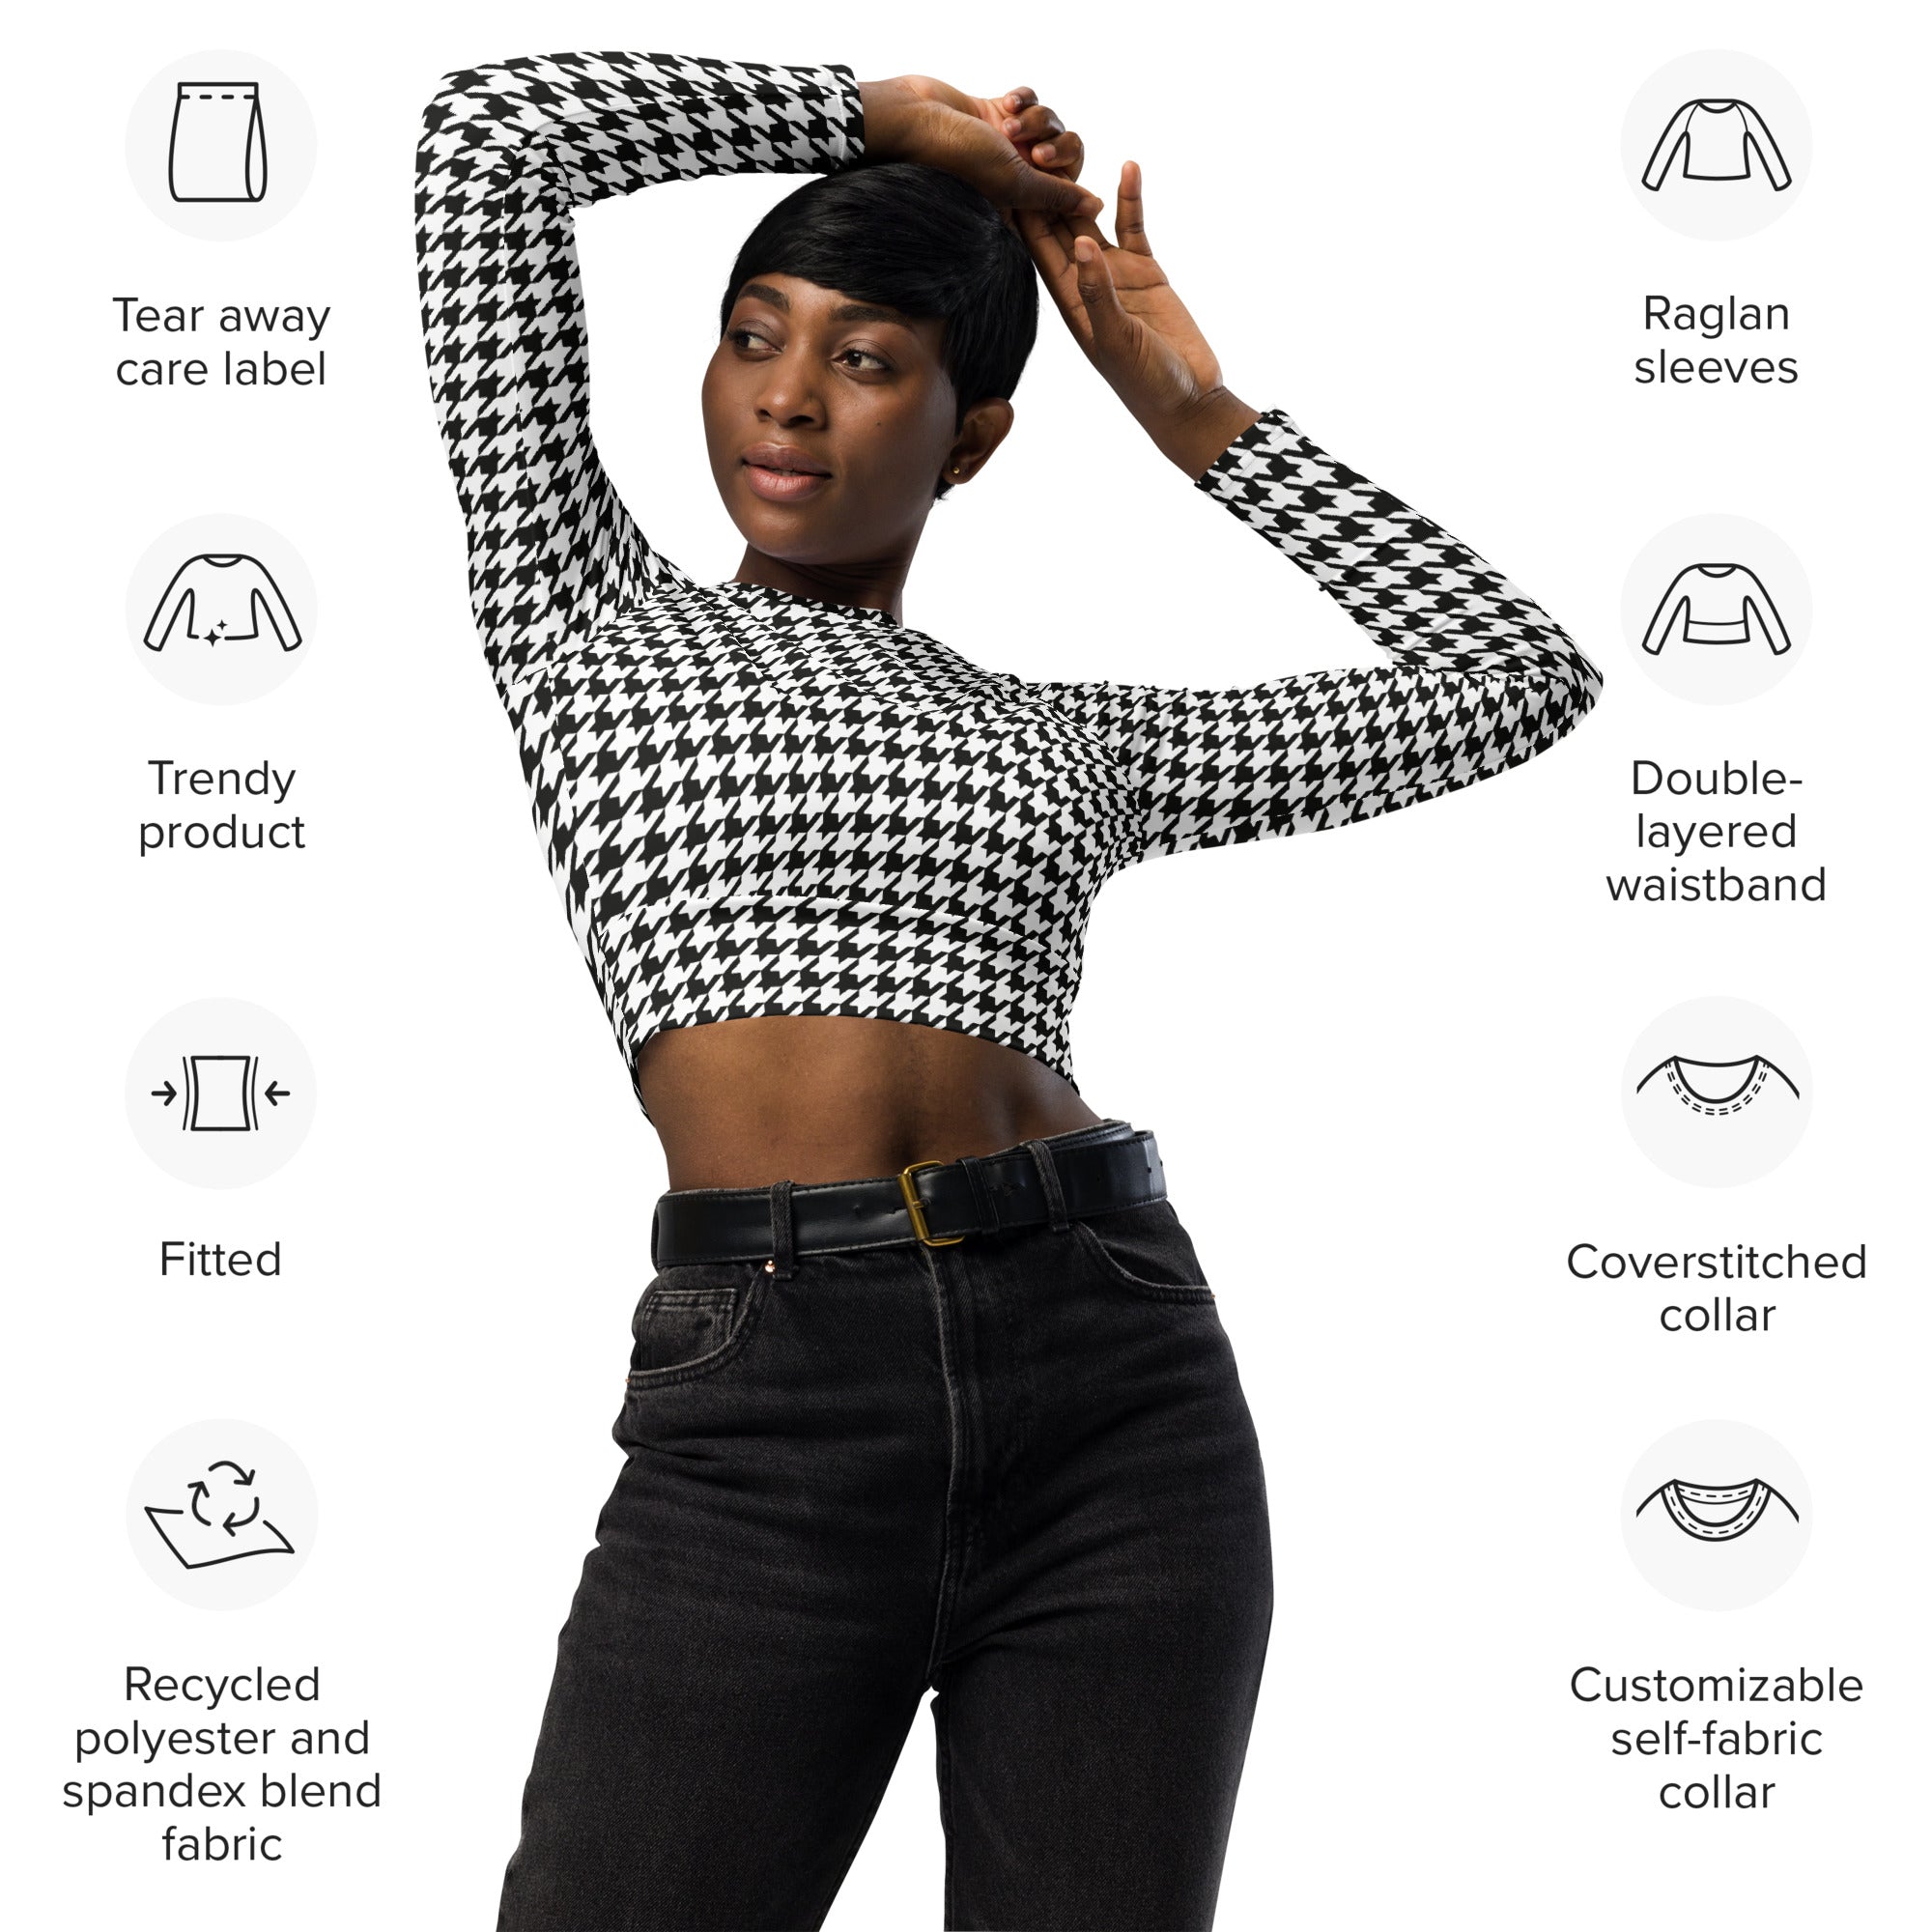 Black & White Houndstooth Print Recycled Long-sleeve Crop Top